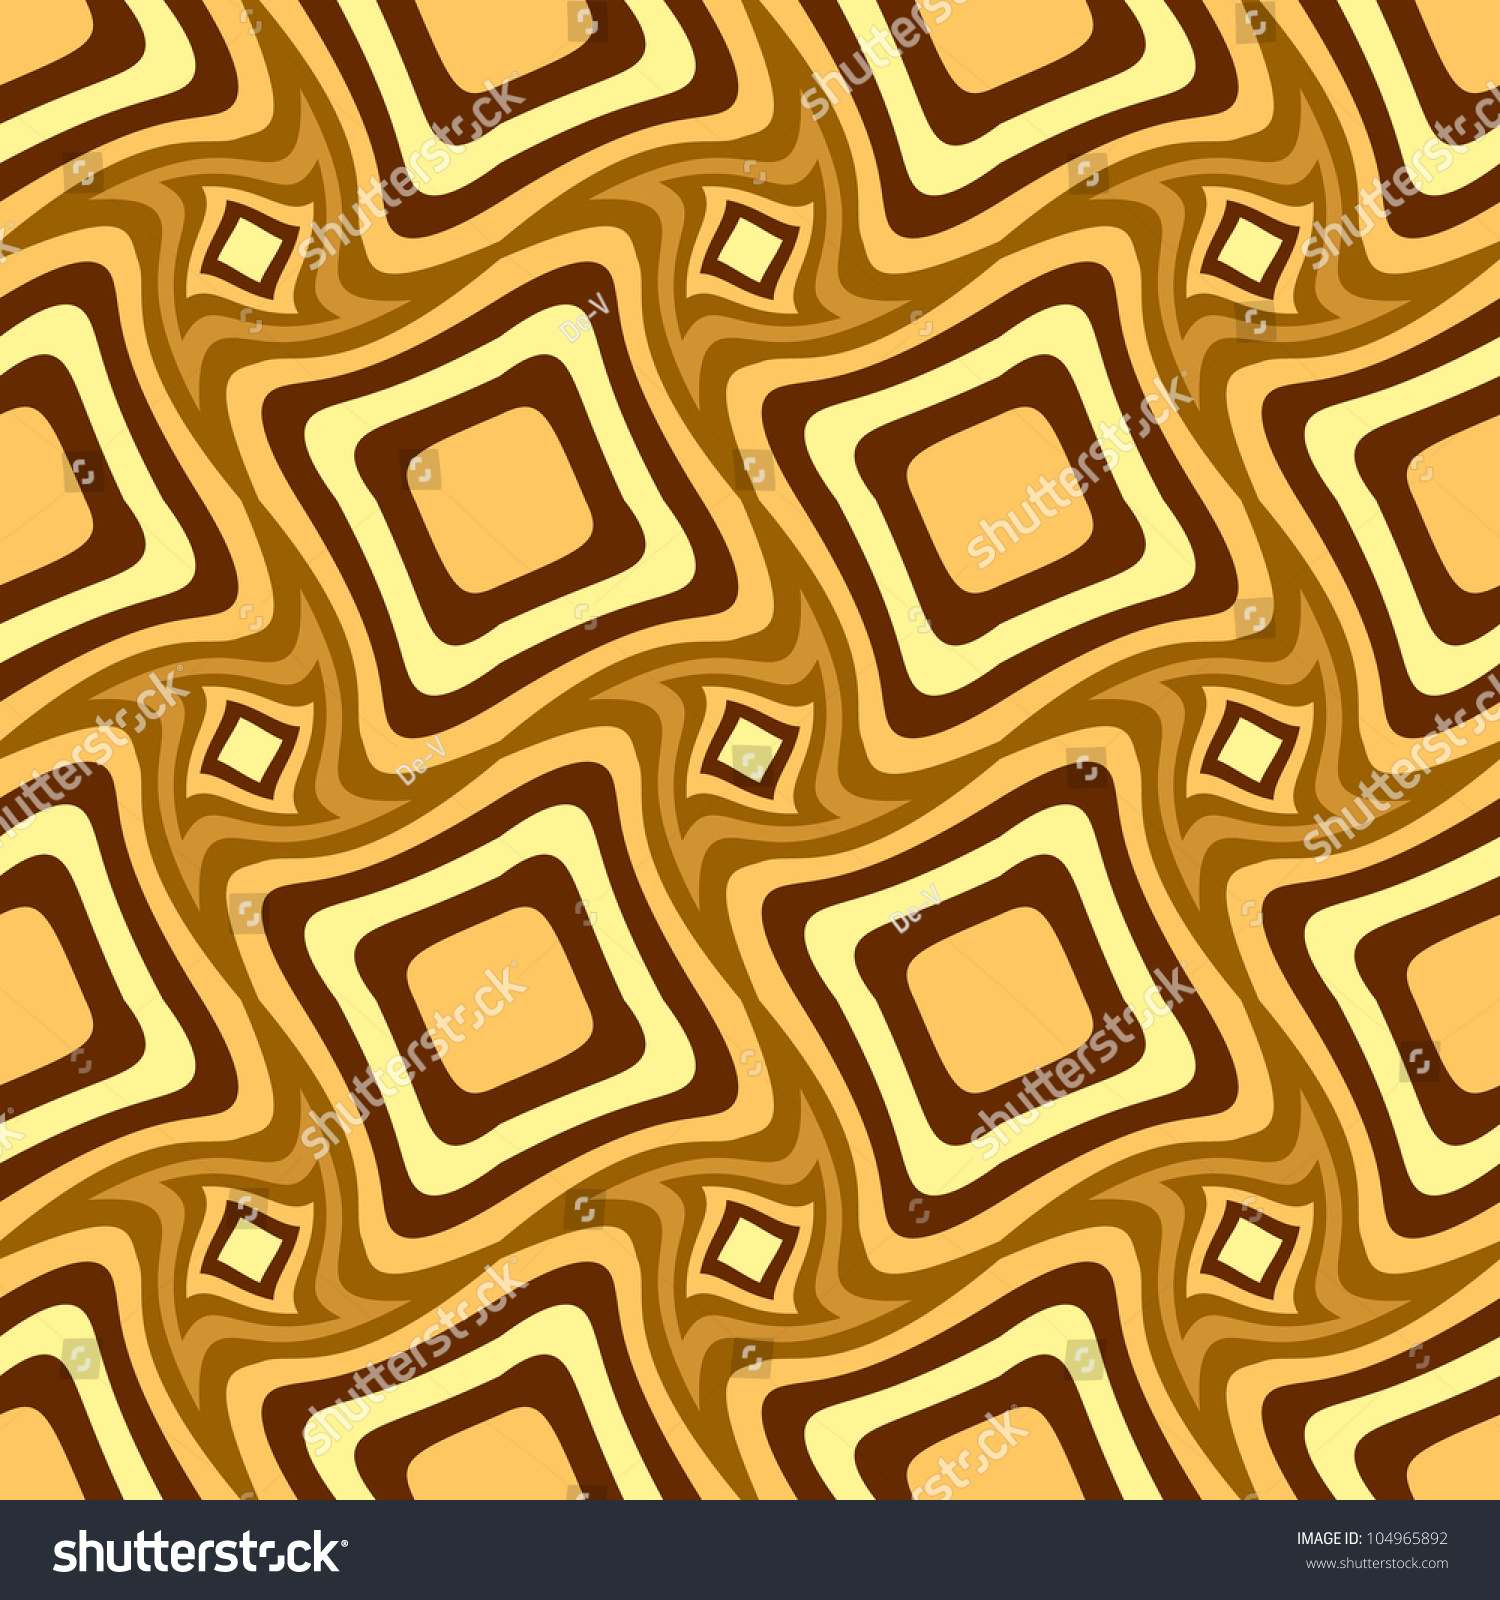 Abstract Fabric Vector Seamless Background. Vector Illustration